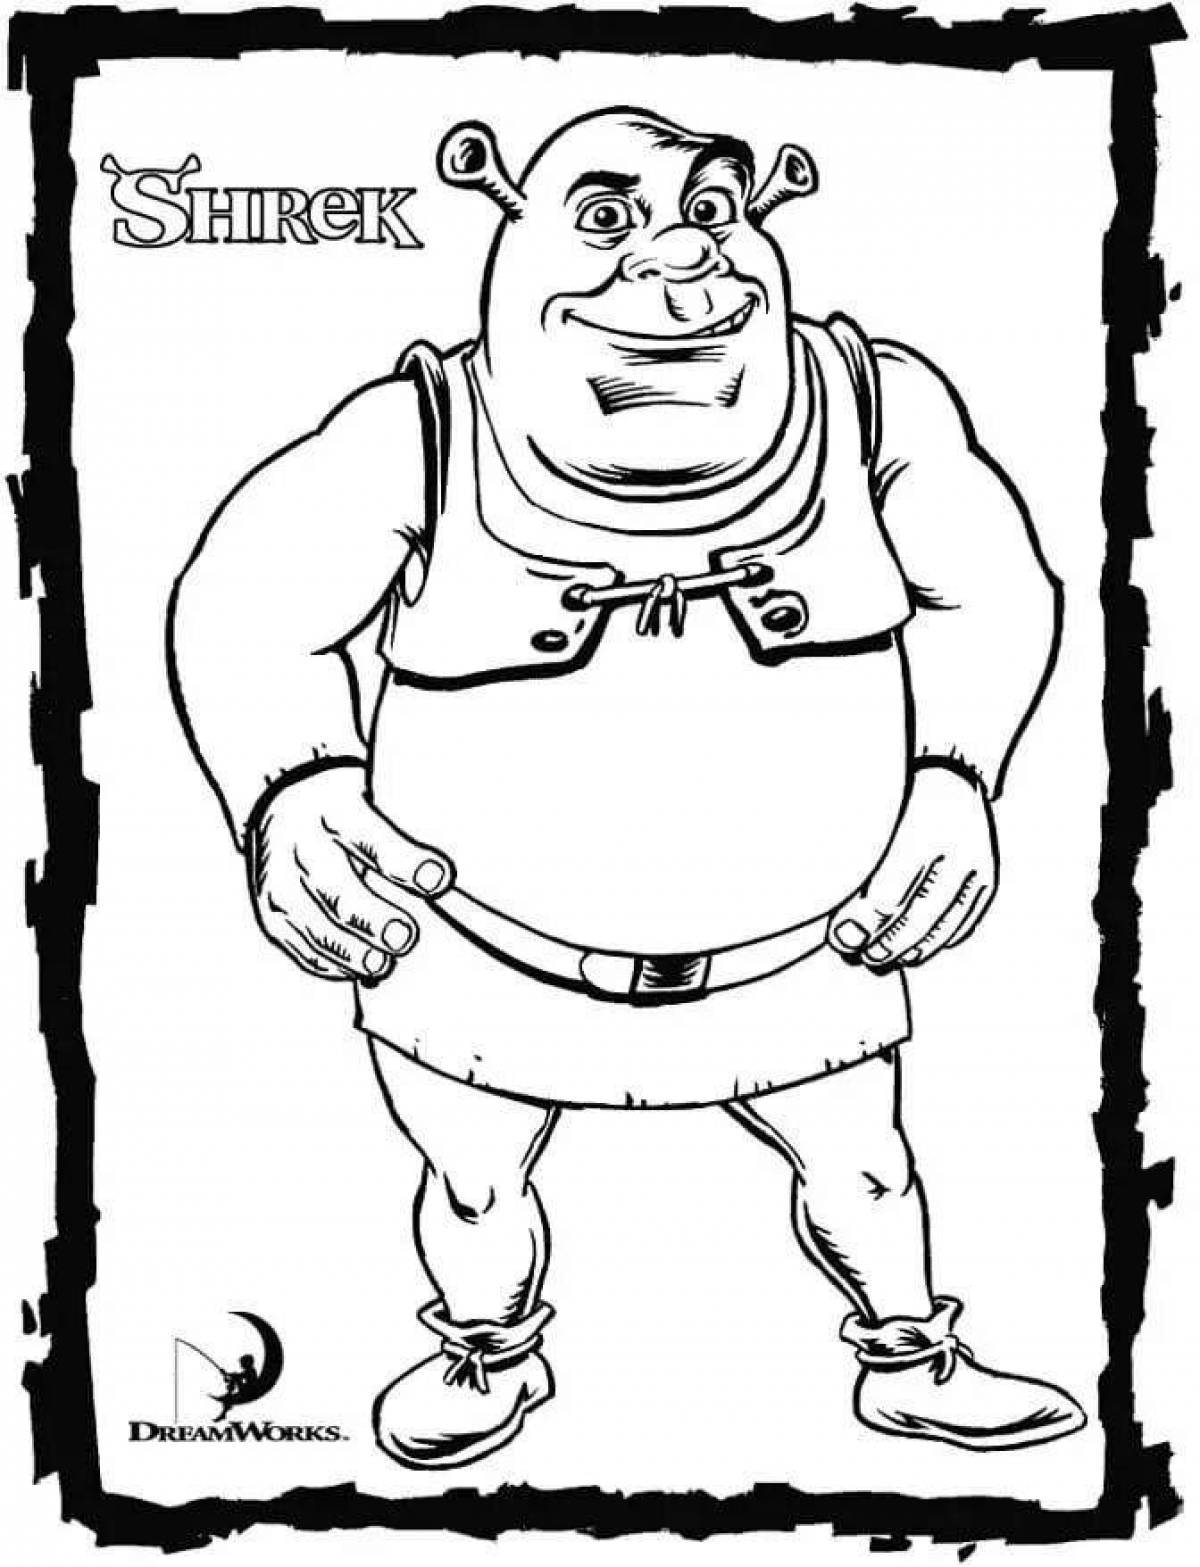 Colorful shrek coloring page